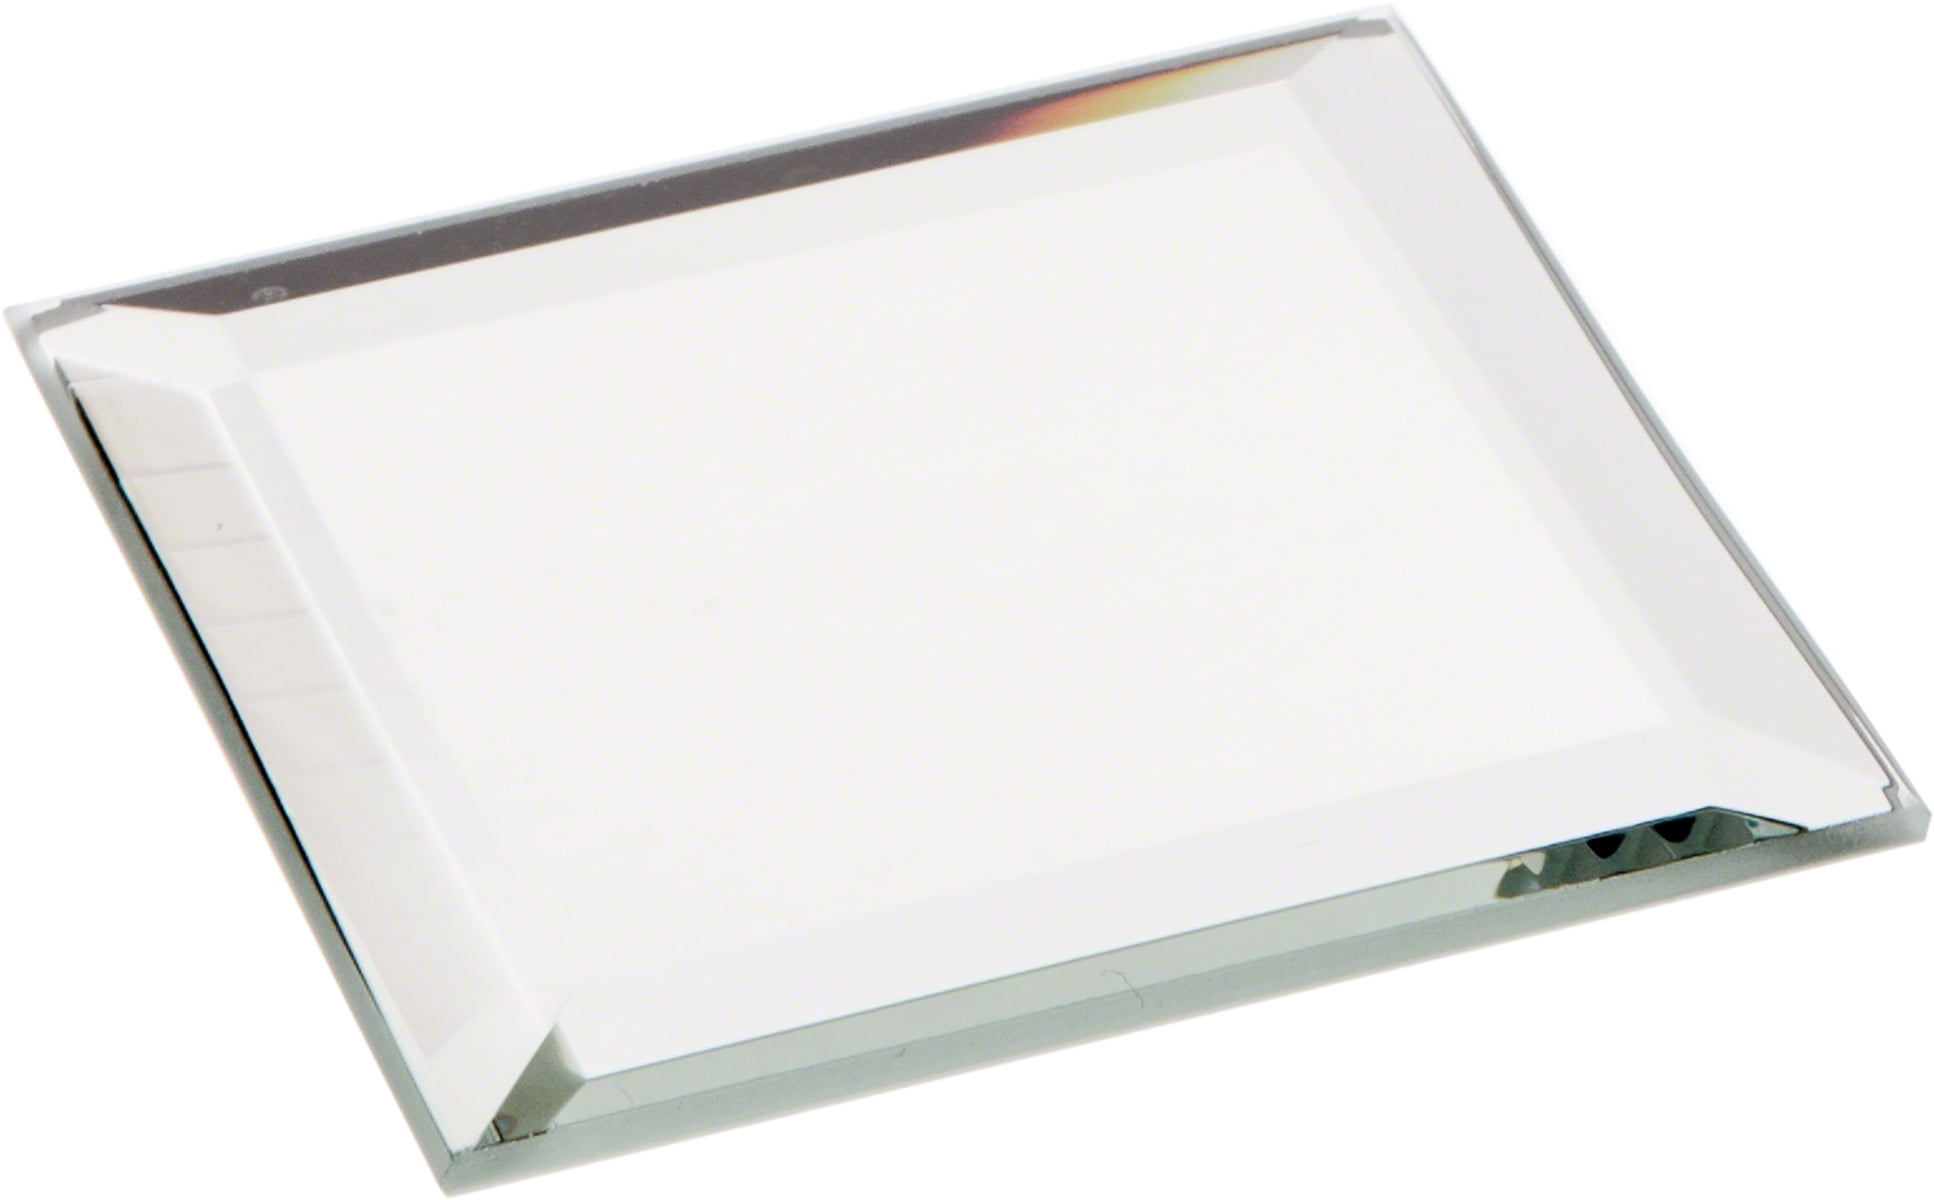 Pack of 6 2.5 inch x 2.5 inch Plymor Square 3mm Beveled Glass Mirror 